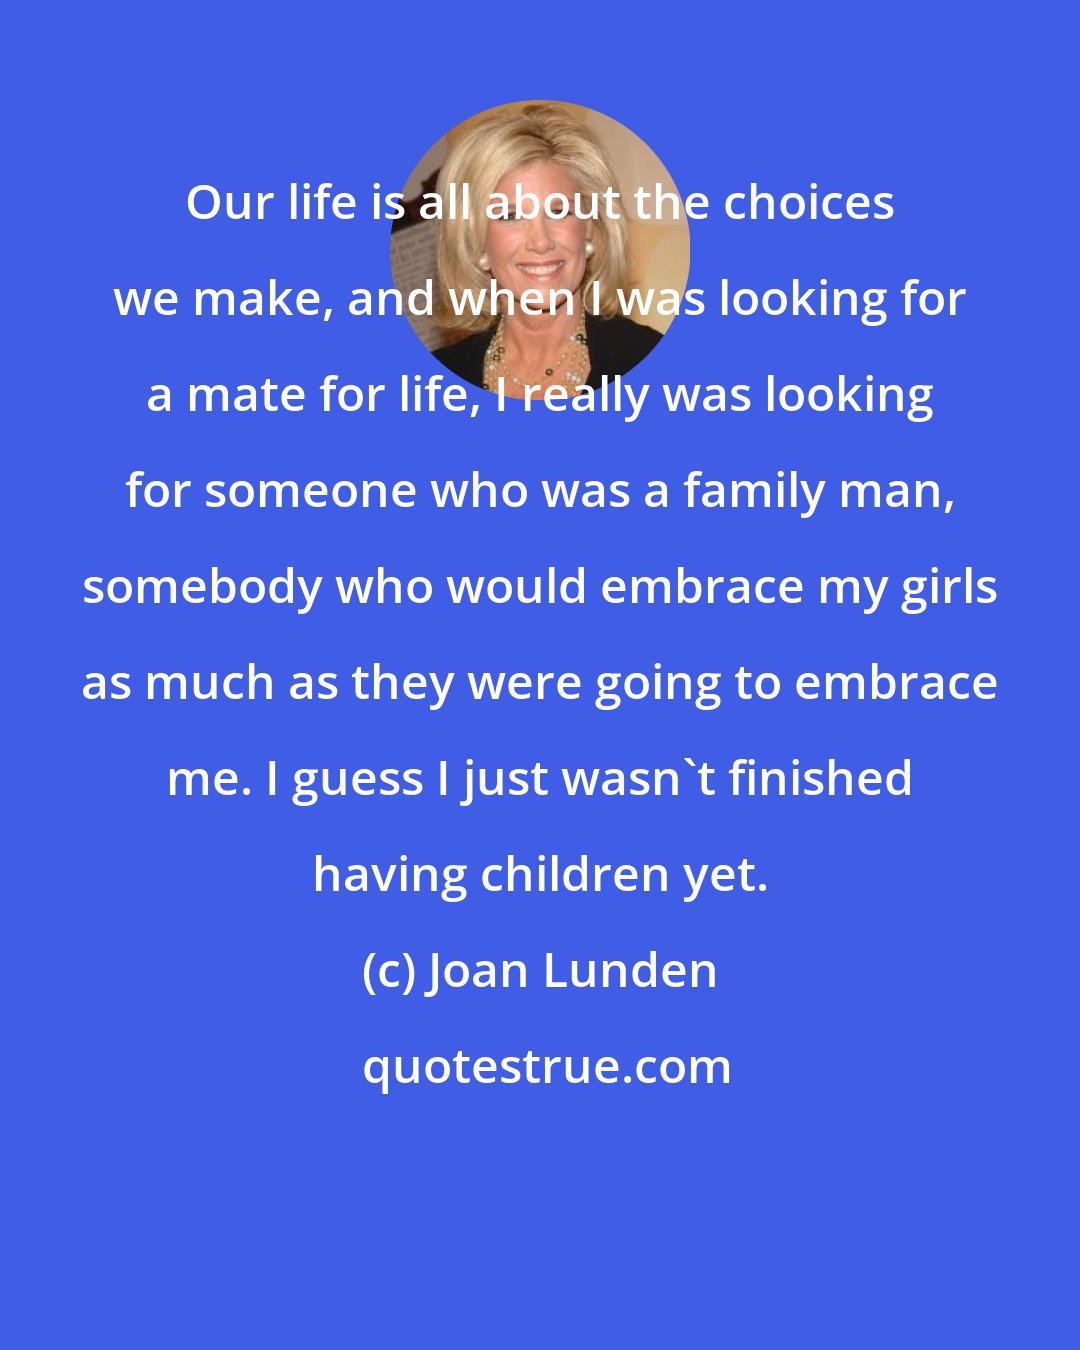 Joan Lunden: Our life is all about the choices we make, and when I was looking for a mate for life, I really was looking for someone who was a family man, somebody who would embrace my girls as much as they were going to embrace me. I guess I just wasn't finished having children yet.